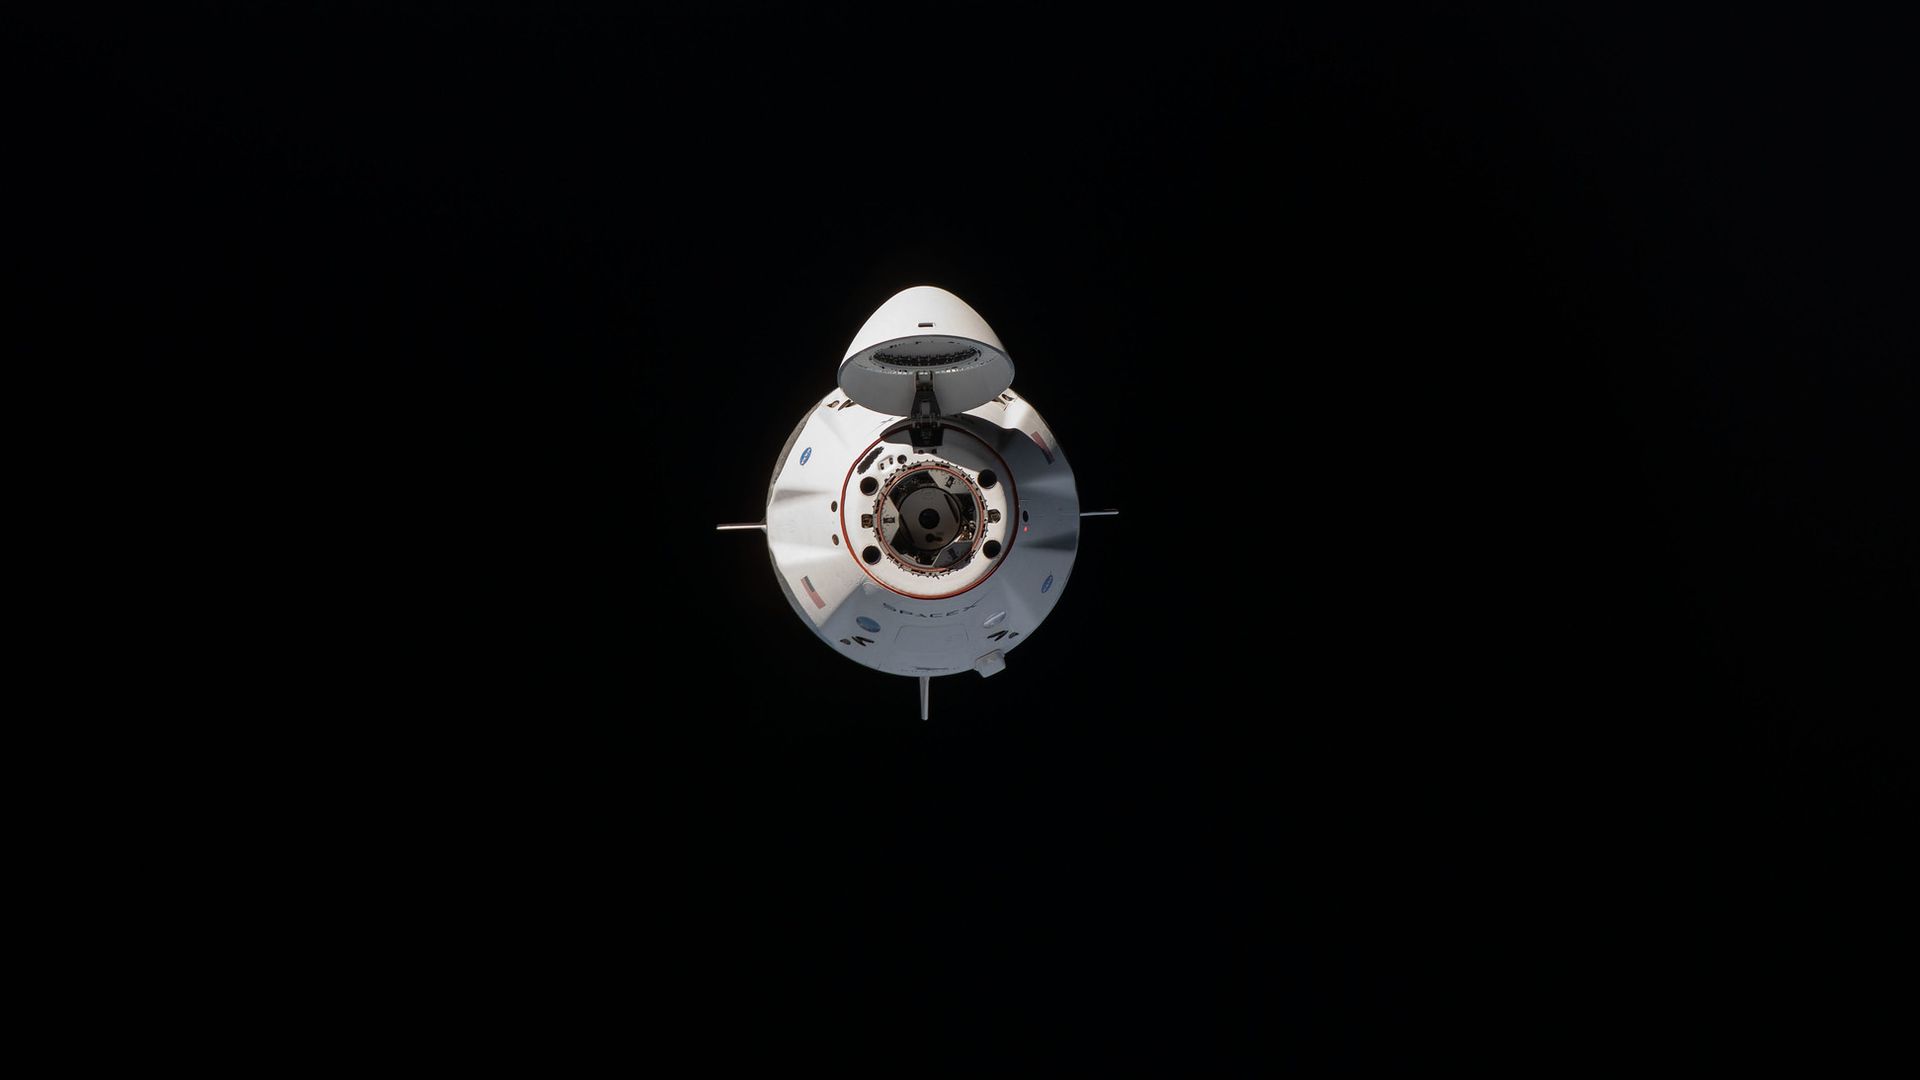 A Crew Dragon capsule on approach to the International Space Station